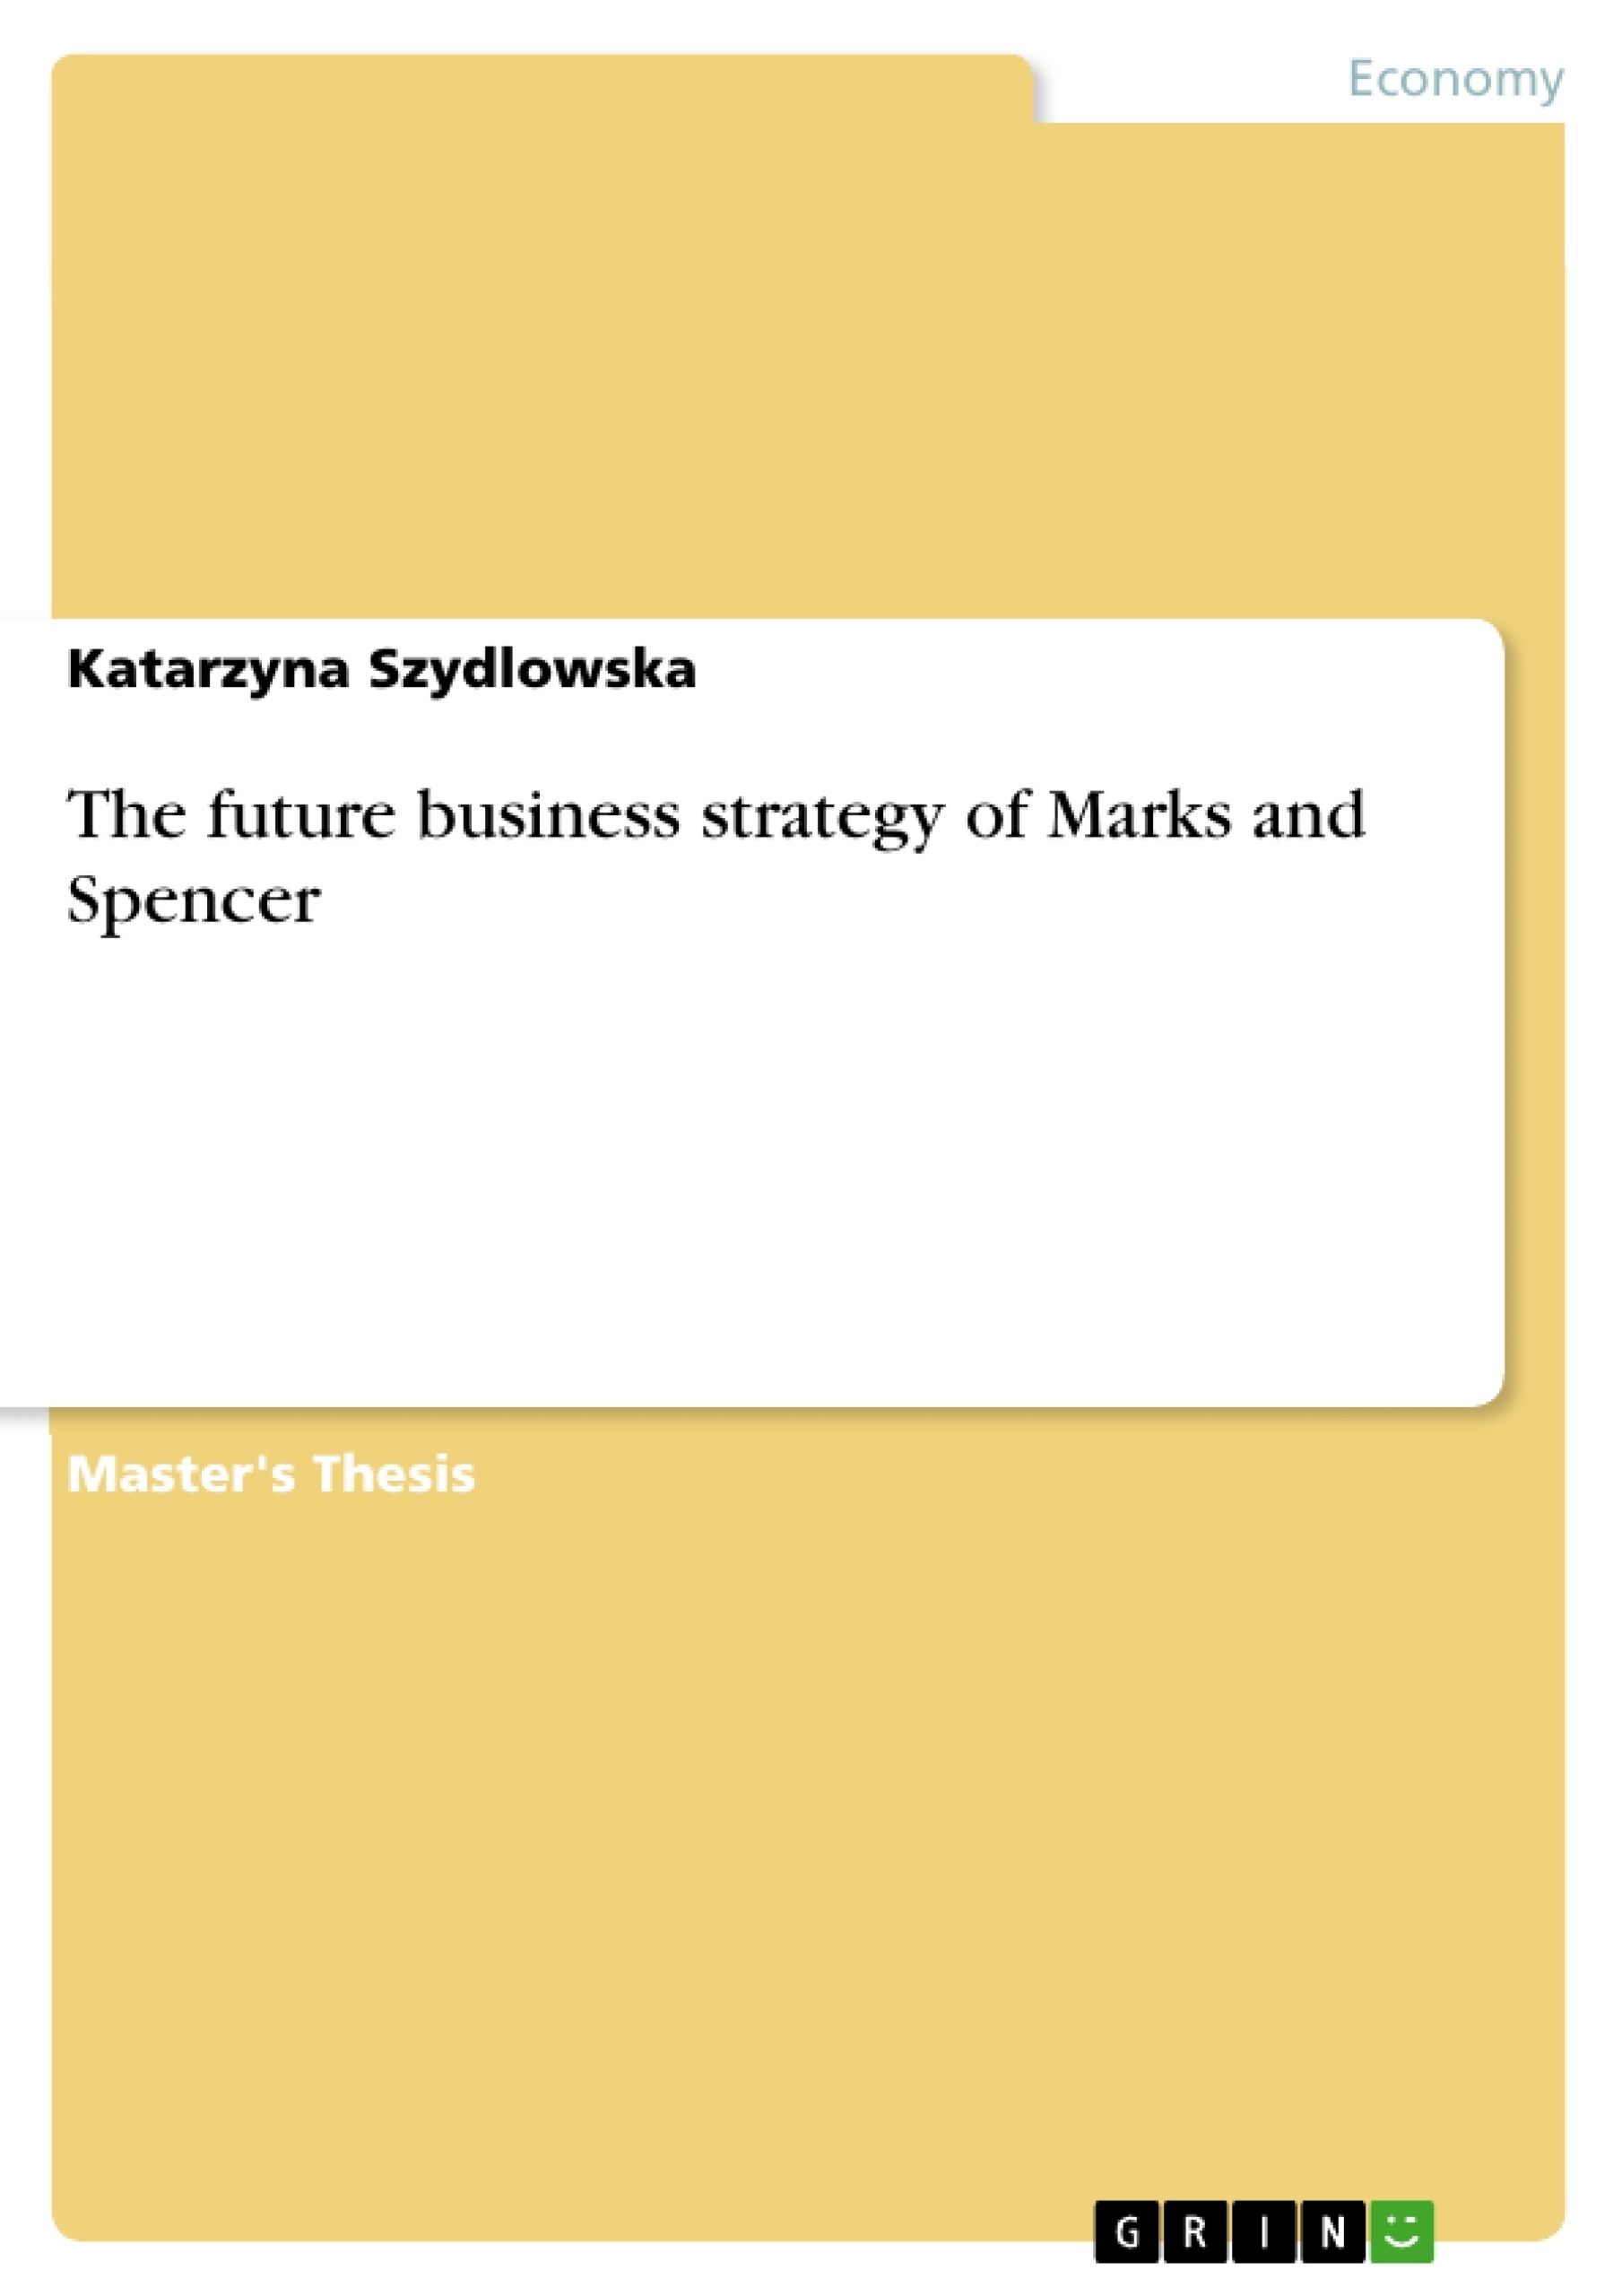 Titre: The future business strategy of Marks and Spencer